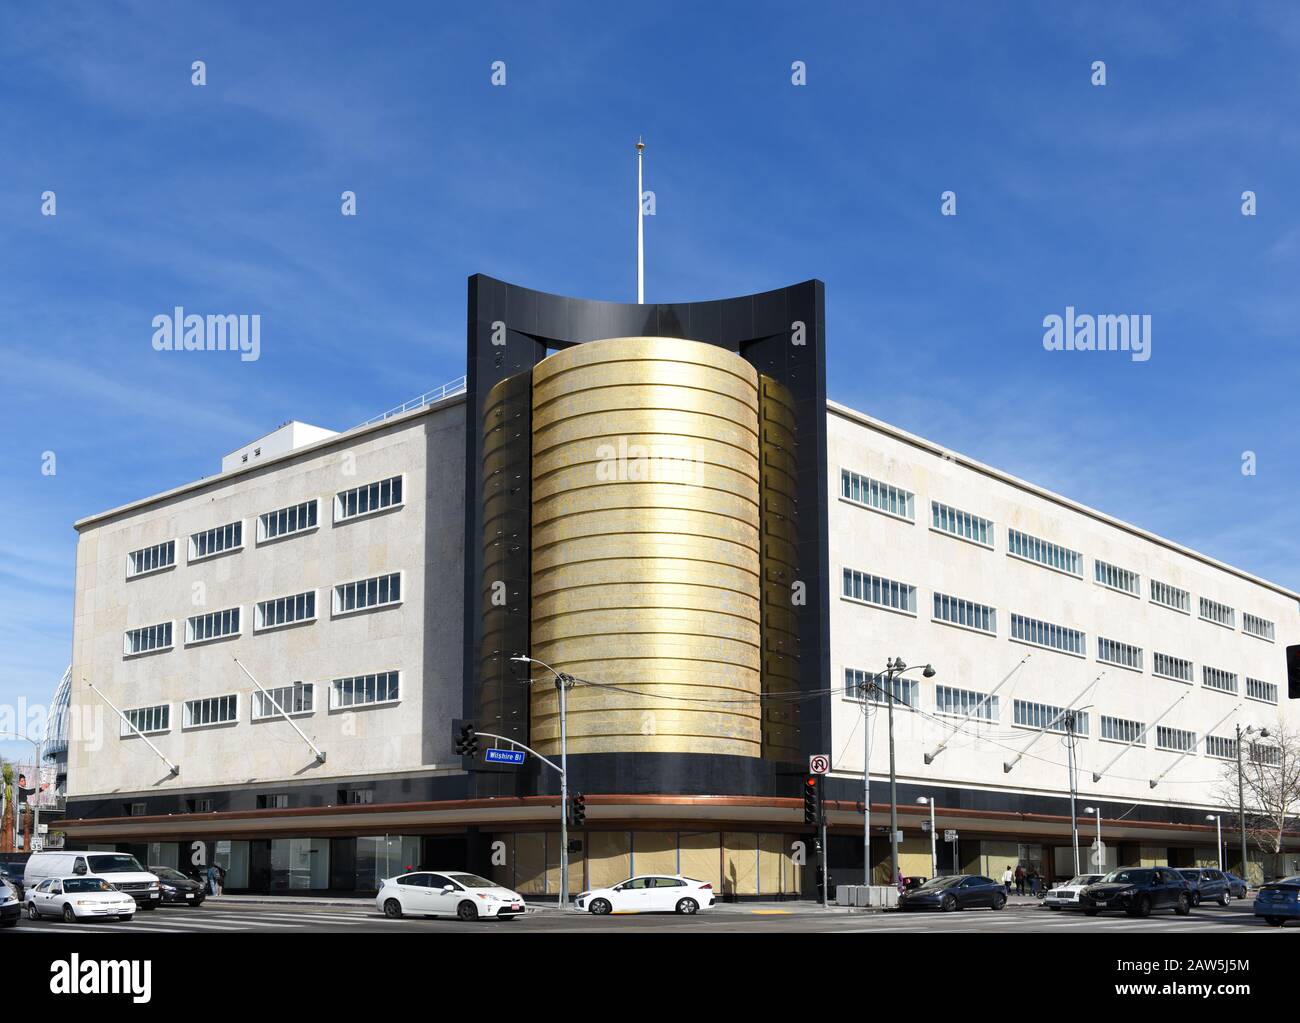 LOS ANGELES, CALIFORNIA - 05 FEB 2020: Construction of the Academy Museum of Motion Pictures at the intersection of Fairfax Avenue and Wilshire Boulev Stock Photo